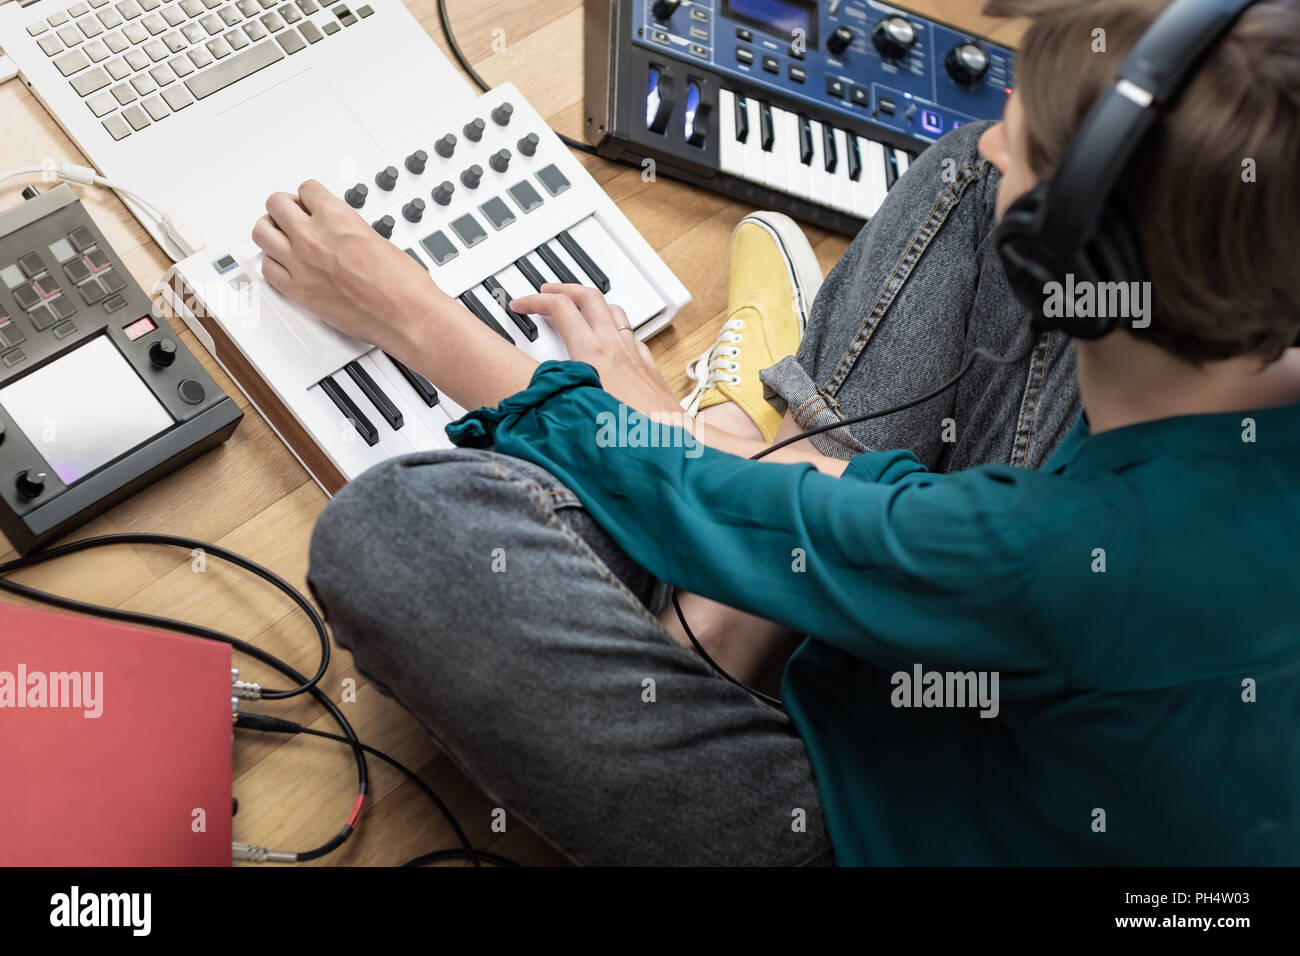 Young woman wearing studio headphones producing modern electronic music.  Female musician at home studio with instruments, laptop and effects  processo Stock Photo - Alamy